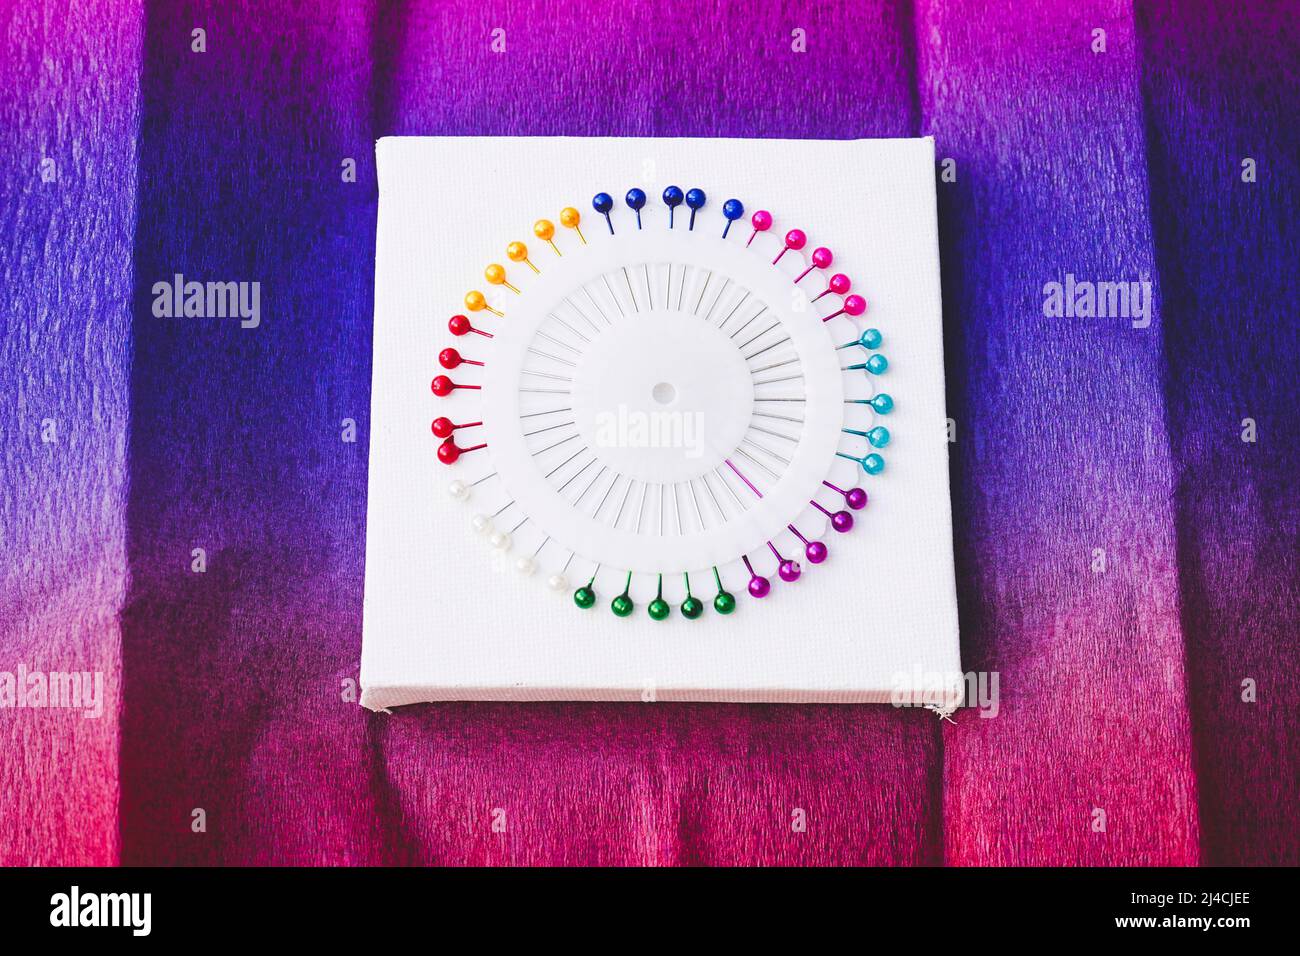 close up of a Rainbow and colorful circle made by pins Stock Photo